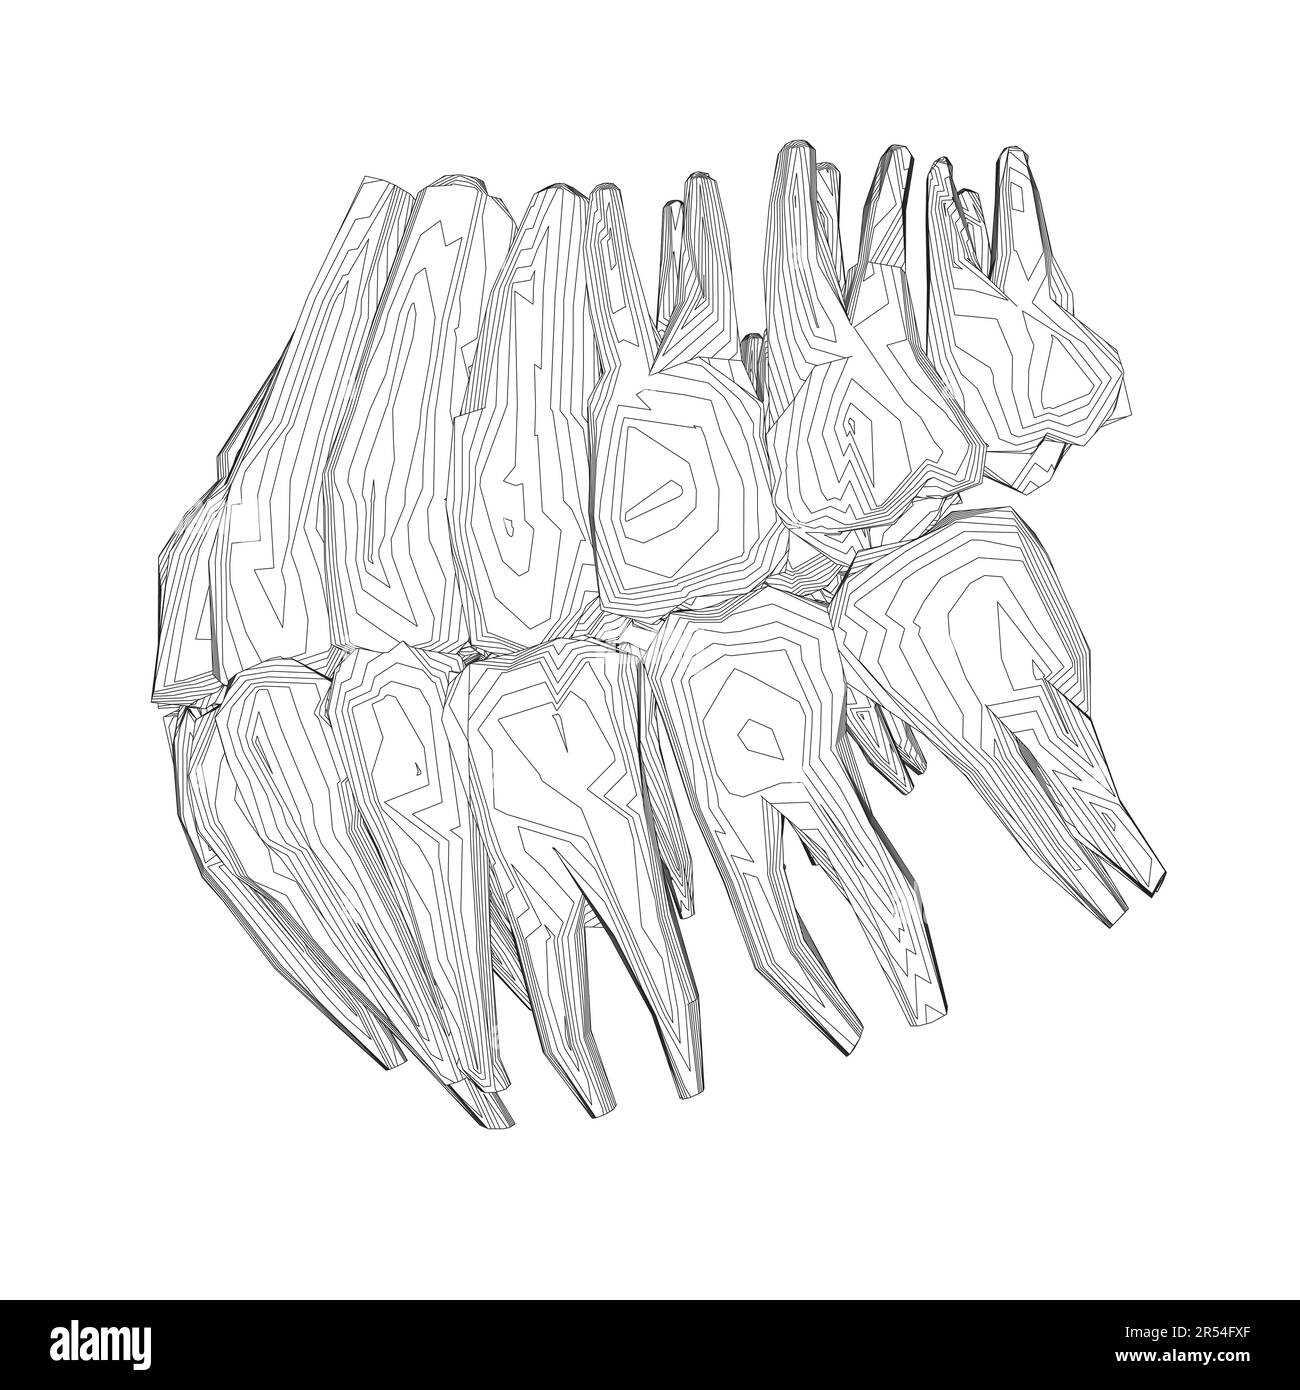 Teeth contour. Hand drawn different types of human tooth collection. Dentist graphic template. Engraving fangs and molars. Dental oral care. Toothache Stock Vector